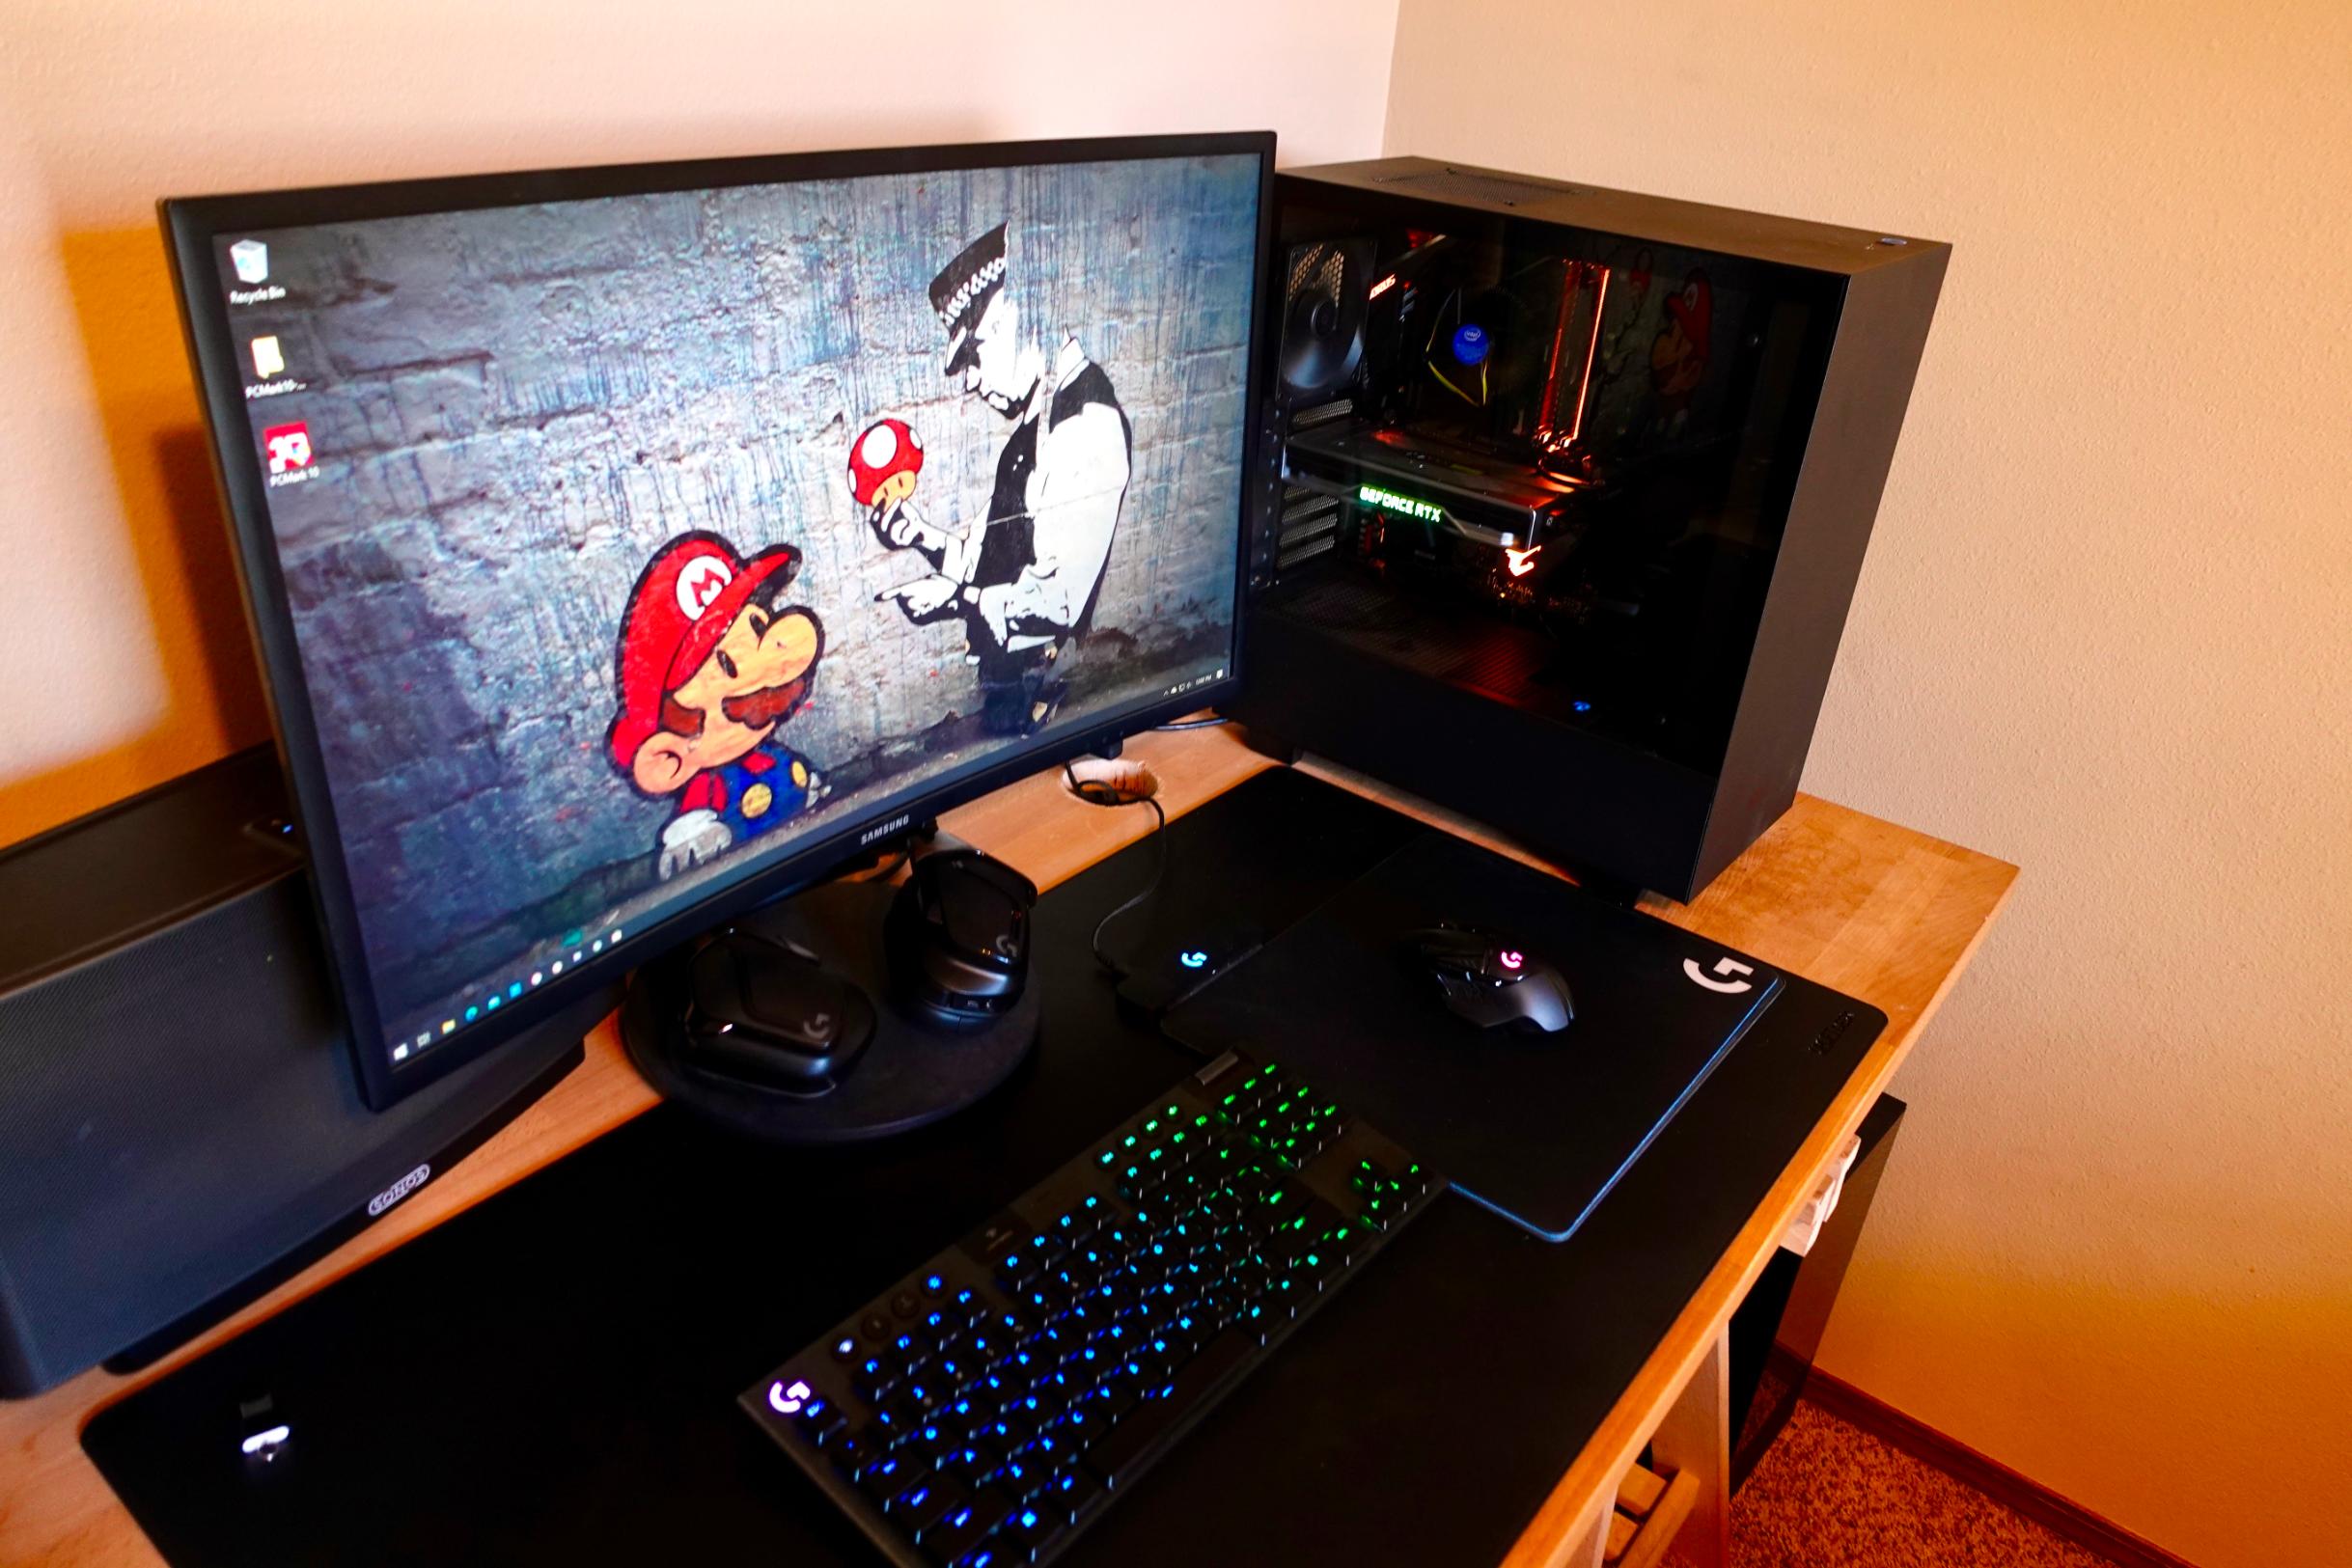 How to build a gaming PC - CNN Underscored